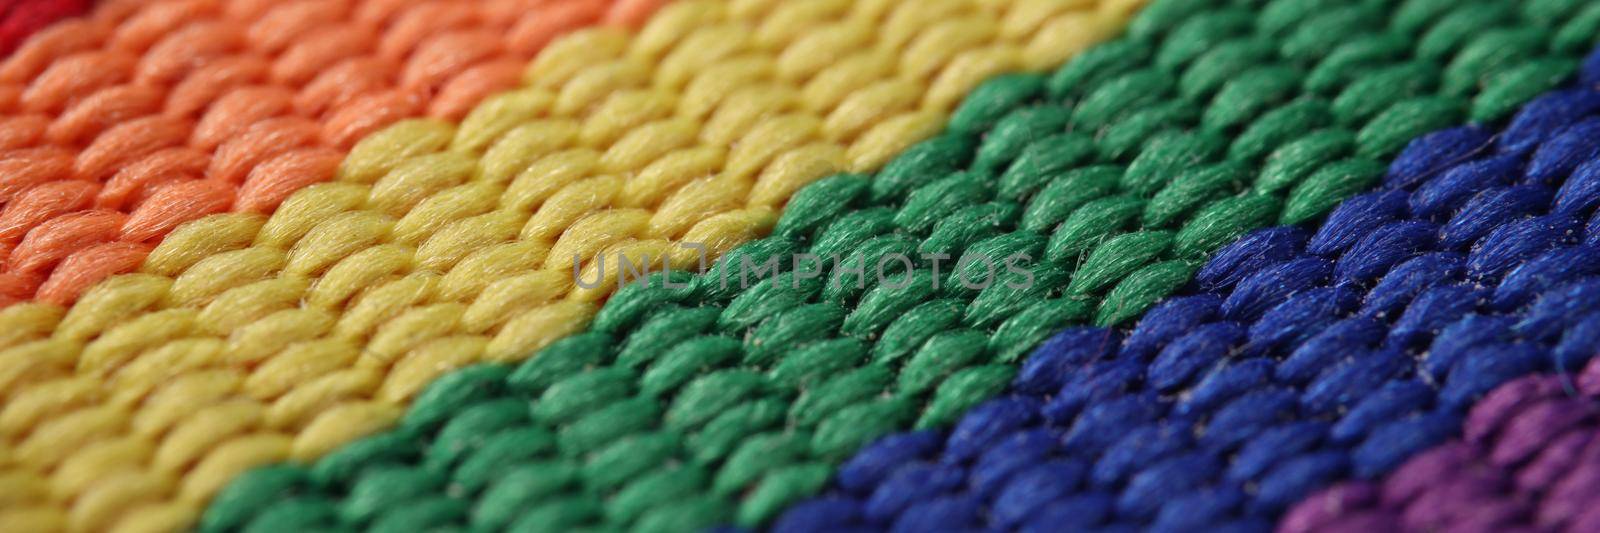 Rainbow lgbt carpet or flag symbol of bisexual homosexual gay lesbian transgender idea by kuprevich